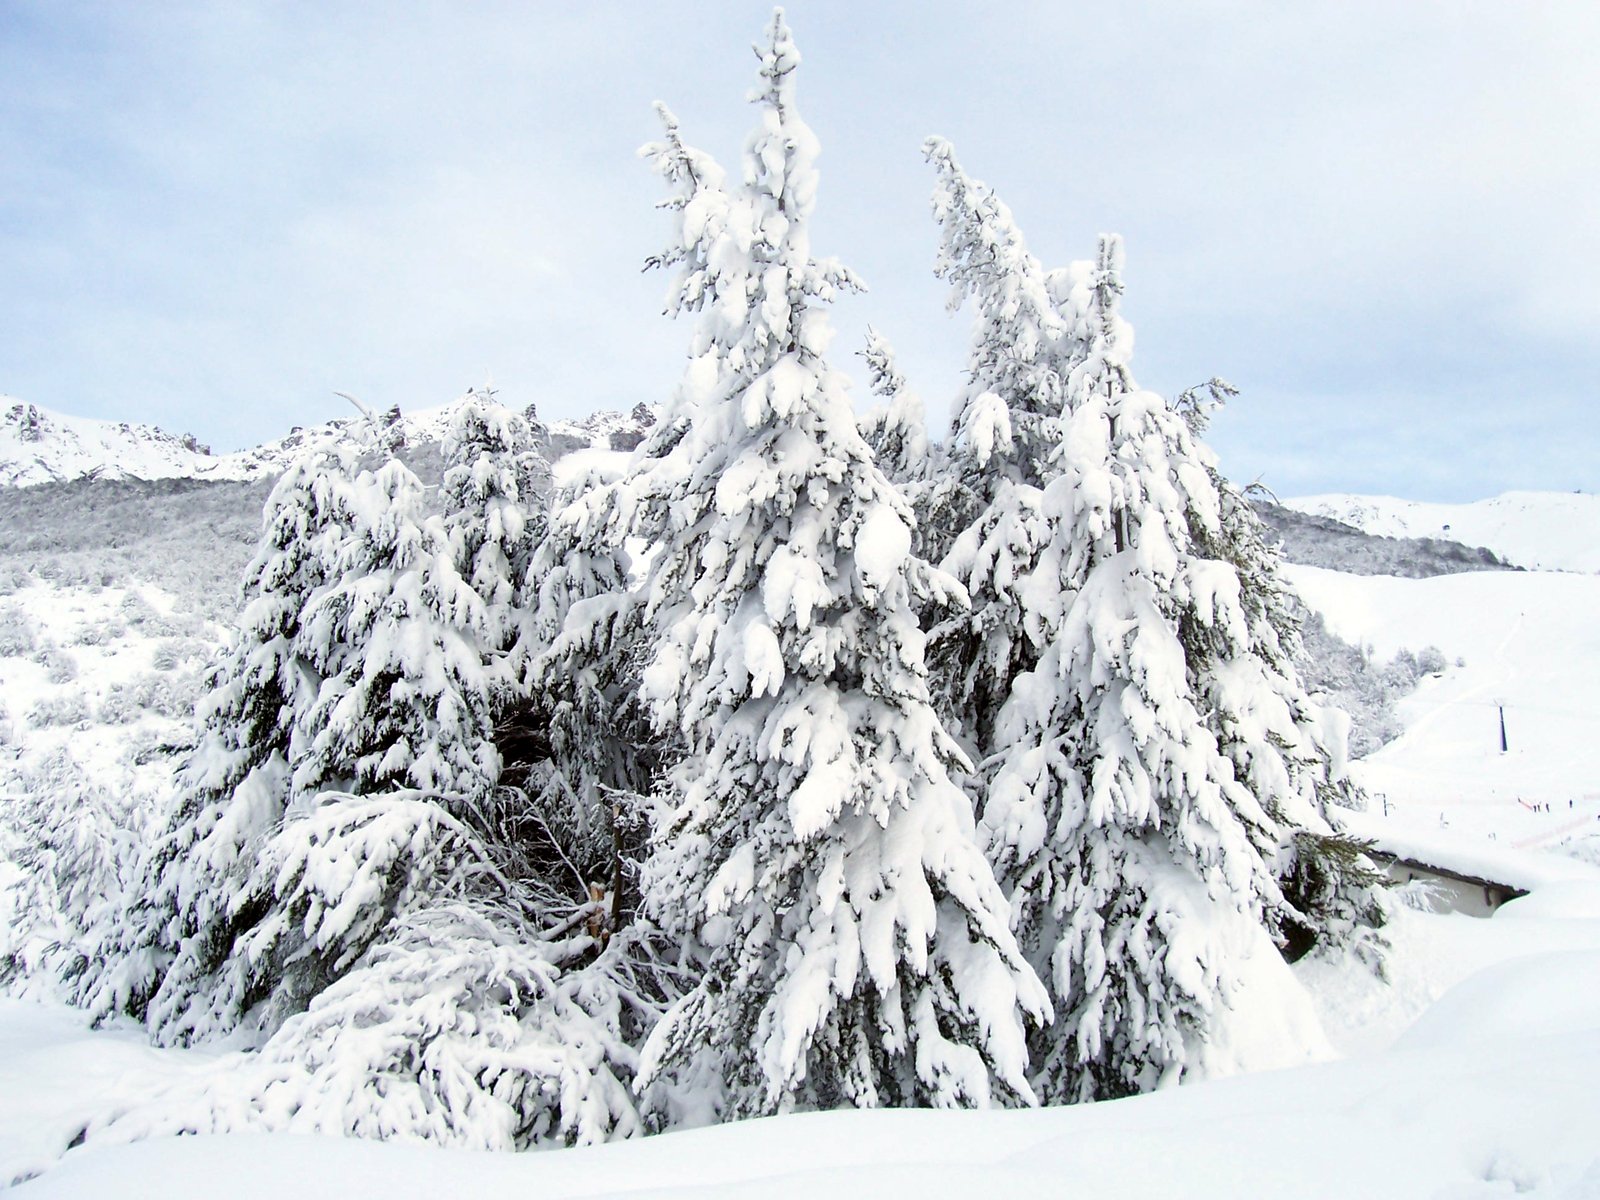 snow covered pine trees and bushes stand in the middle of a snowy landscape